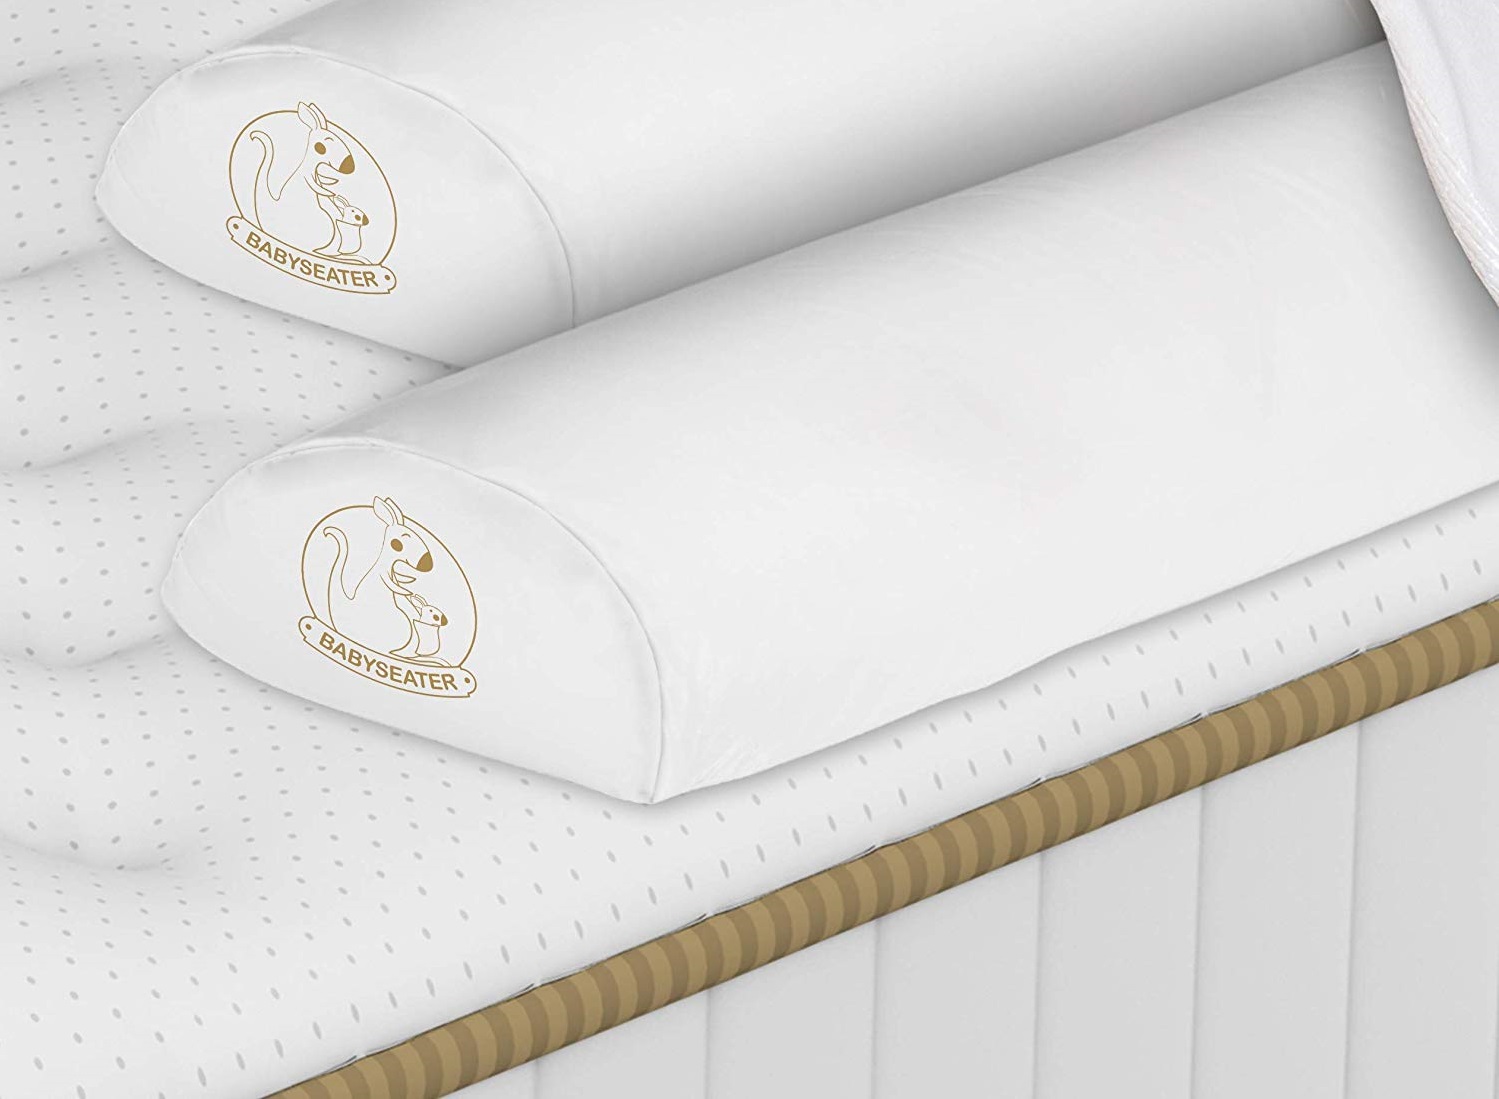 a set of bed bumpers placed on the mattress